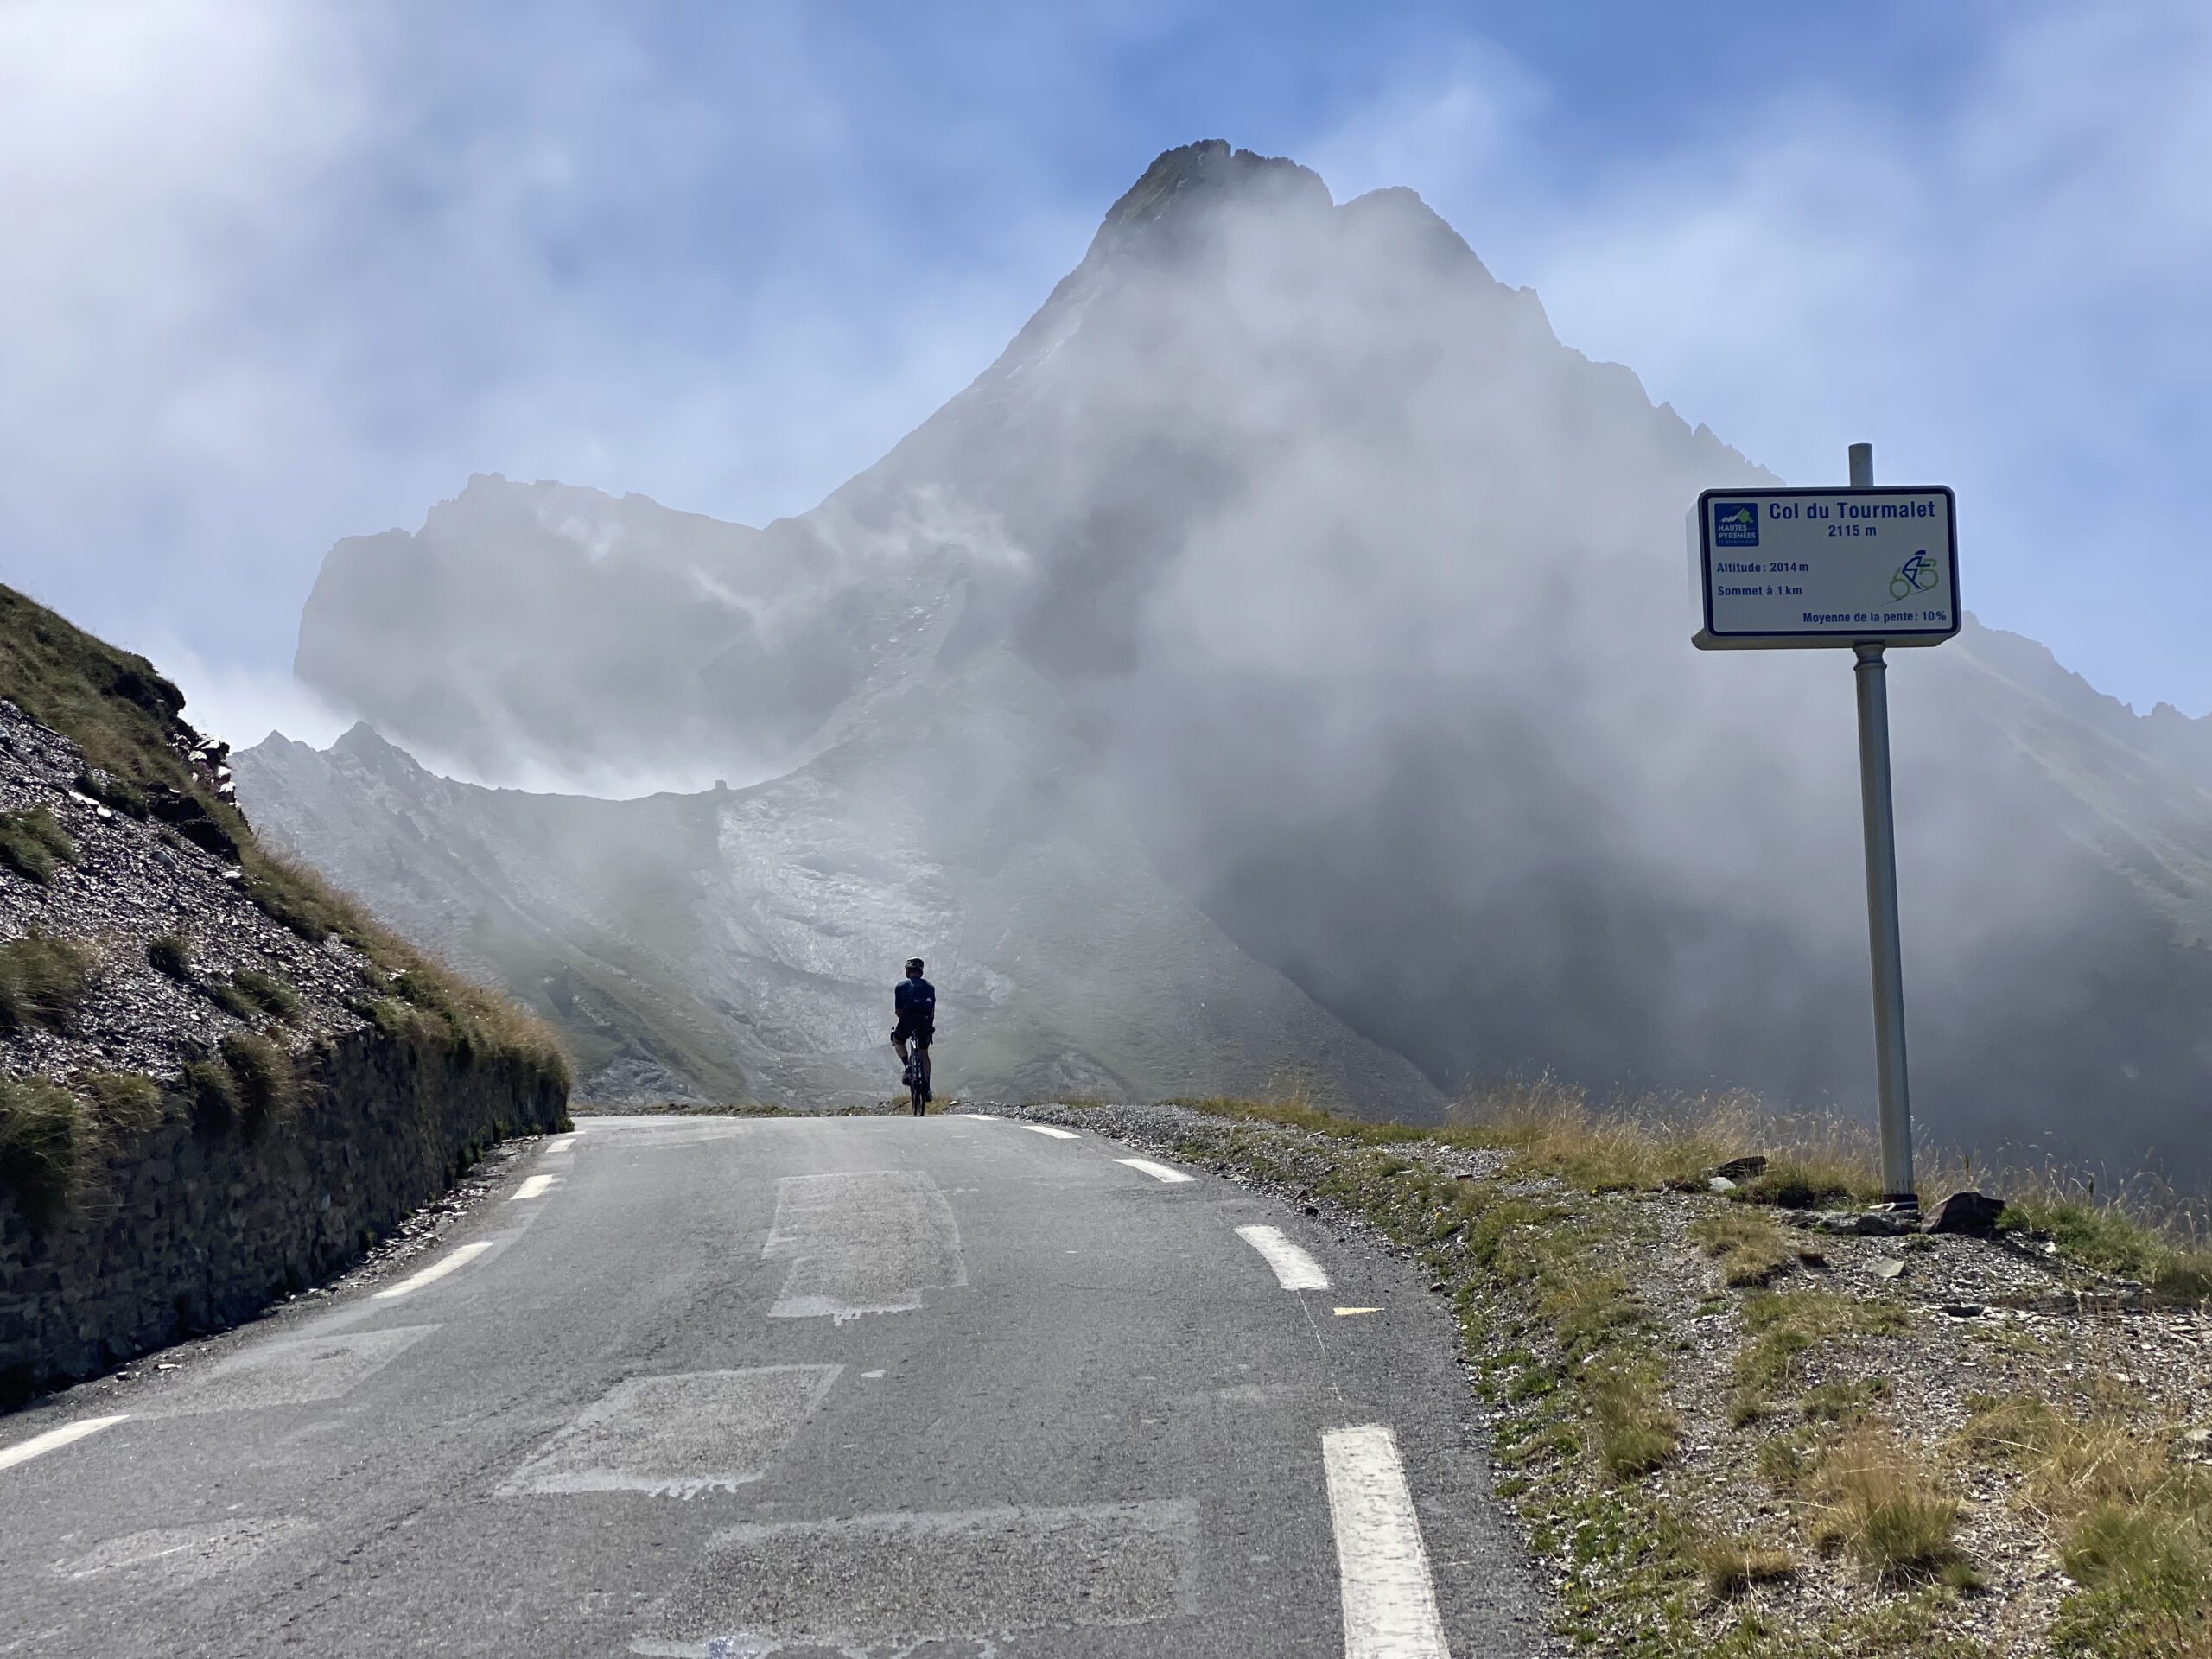 A lone cyclist rides in the mist on the summit of Col du Tourmalet